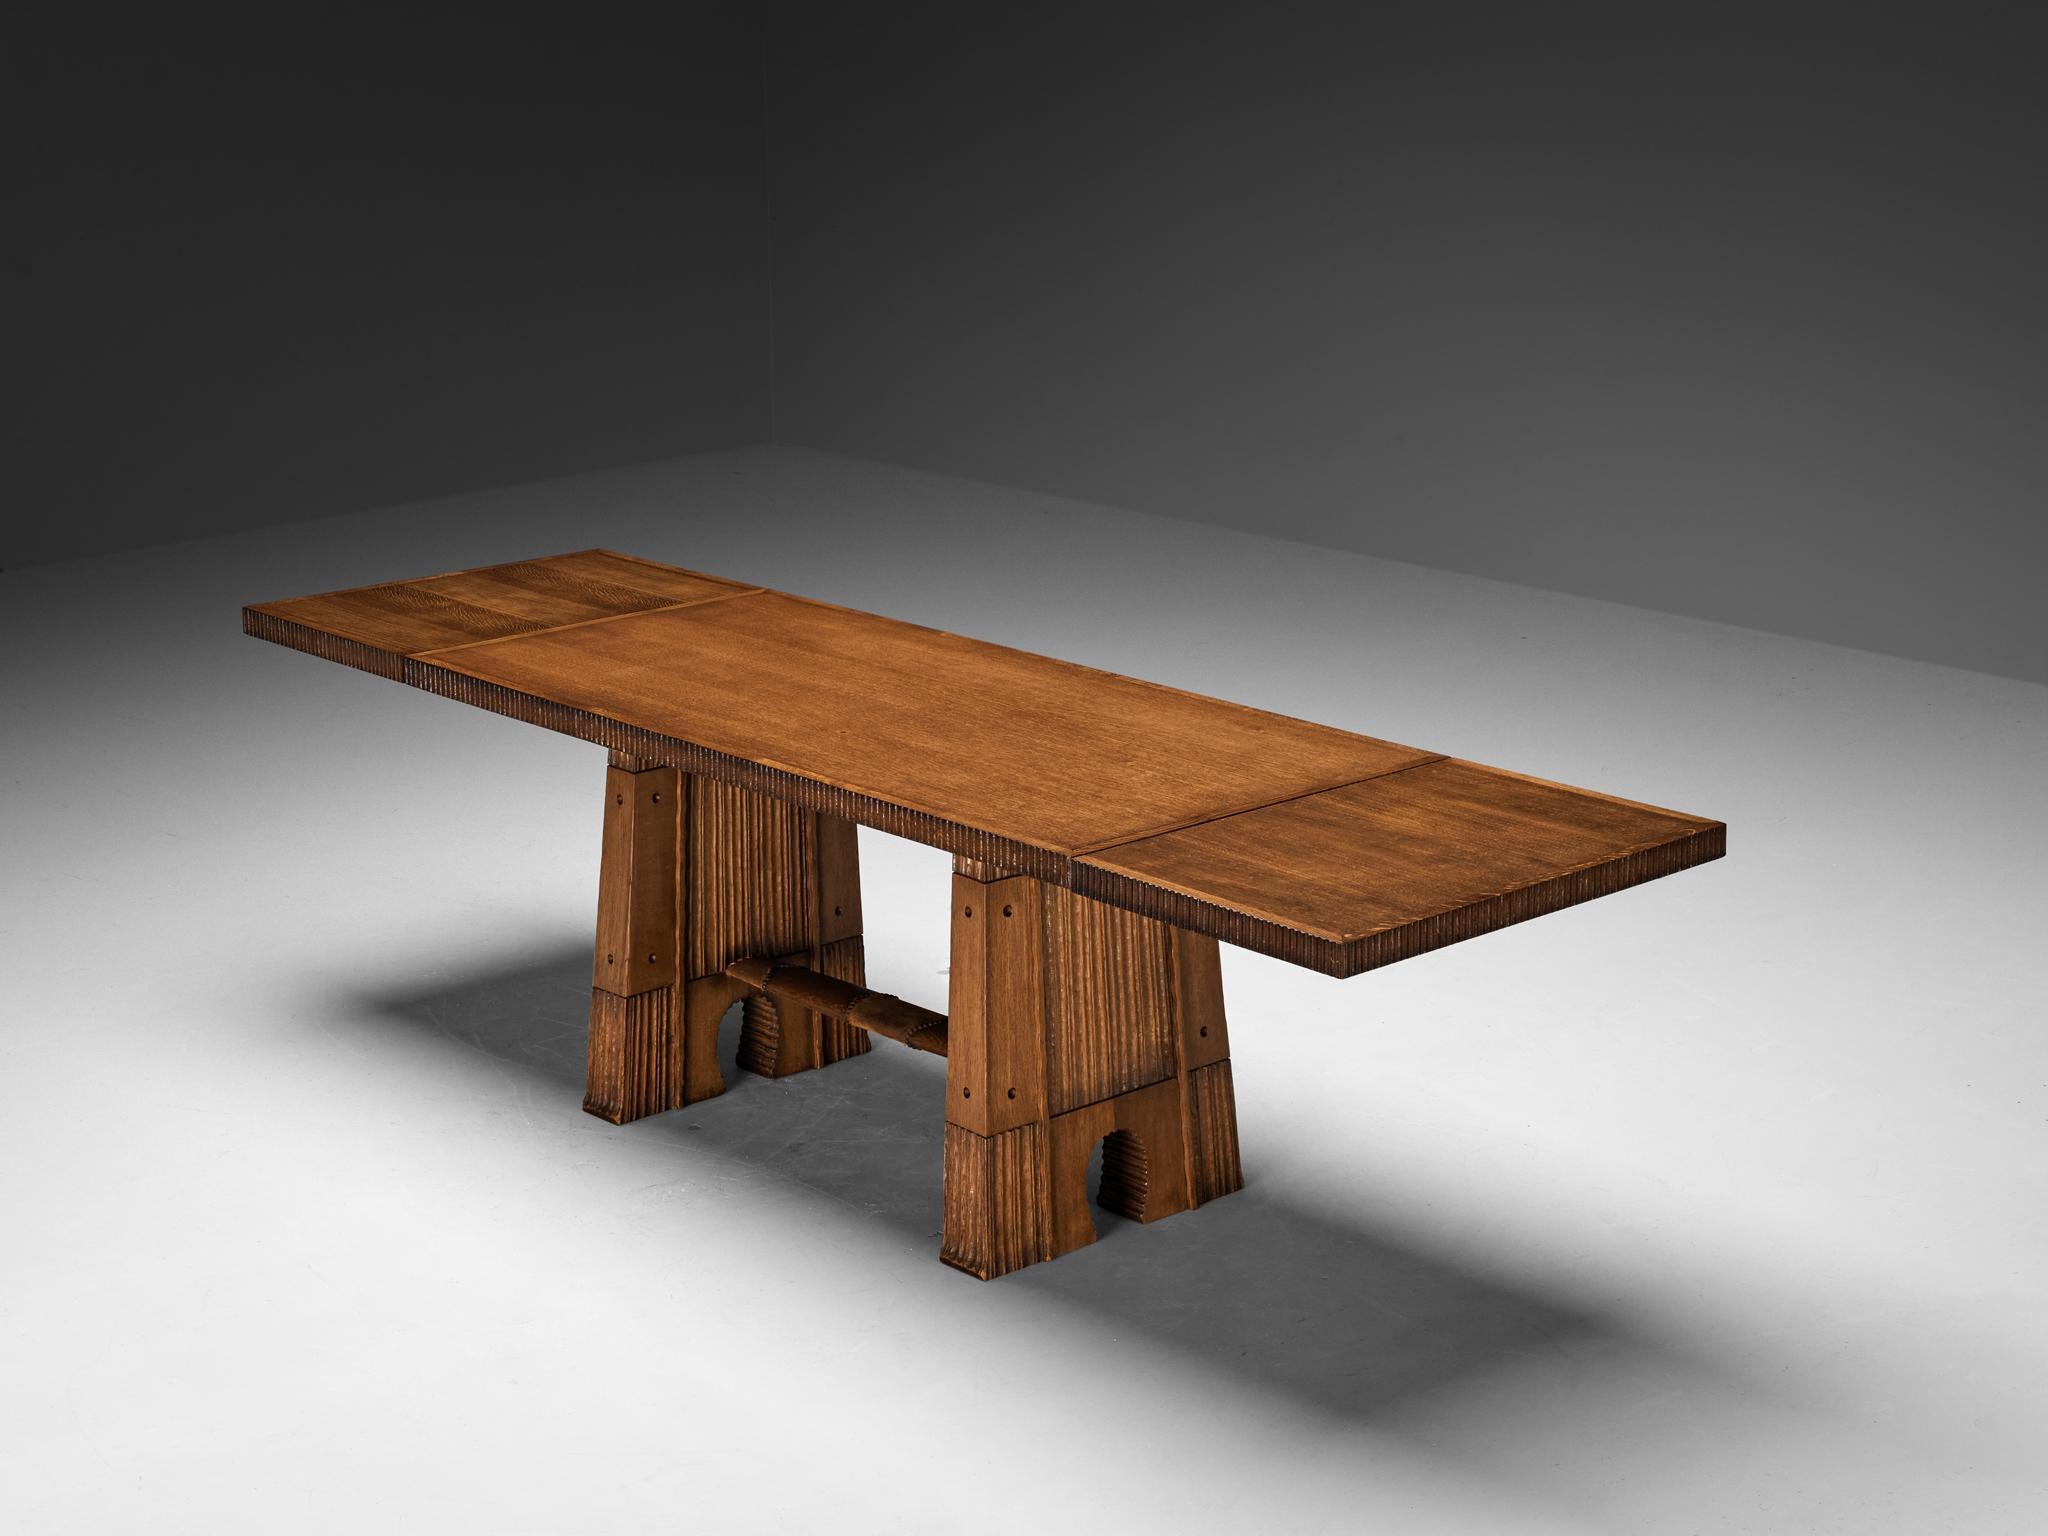 Vittorio Valabrega, extendable dining table, oak, leather, iron, Italy, circa 1935 

Vittorio Valabrega once again proves his great eye for materialization and great craftsmanship this dining table is exemplary for. The table is architecturally